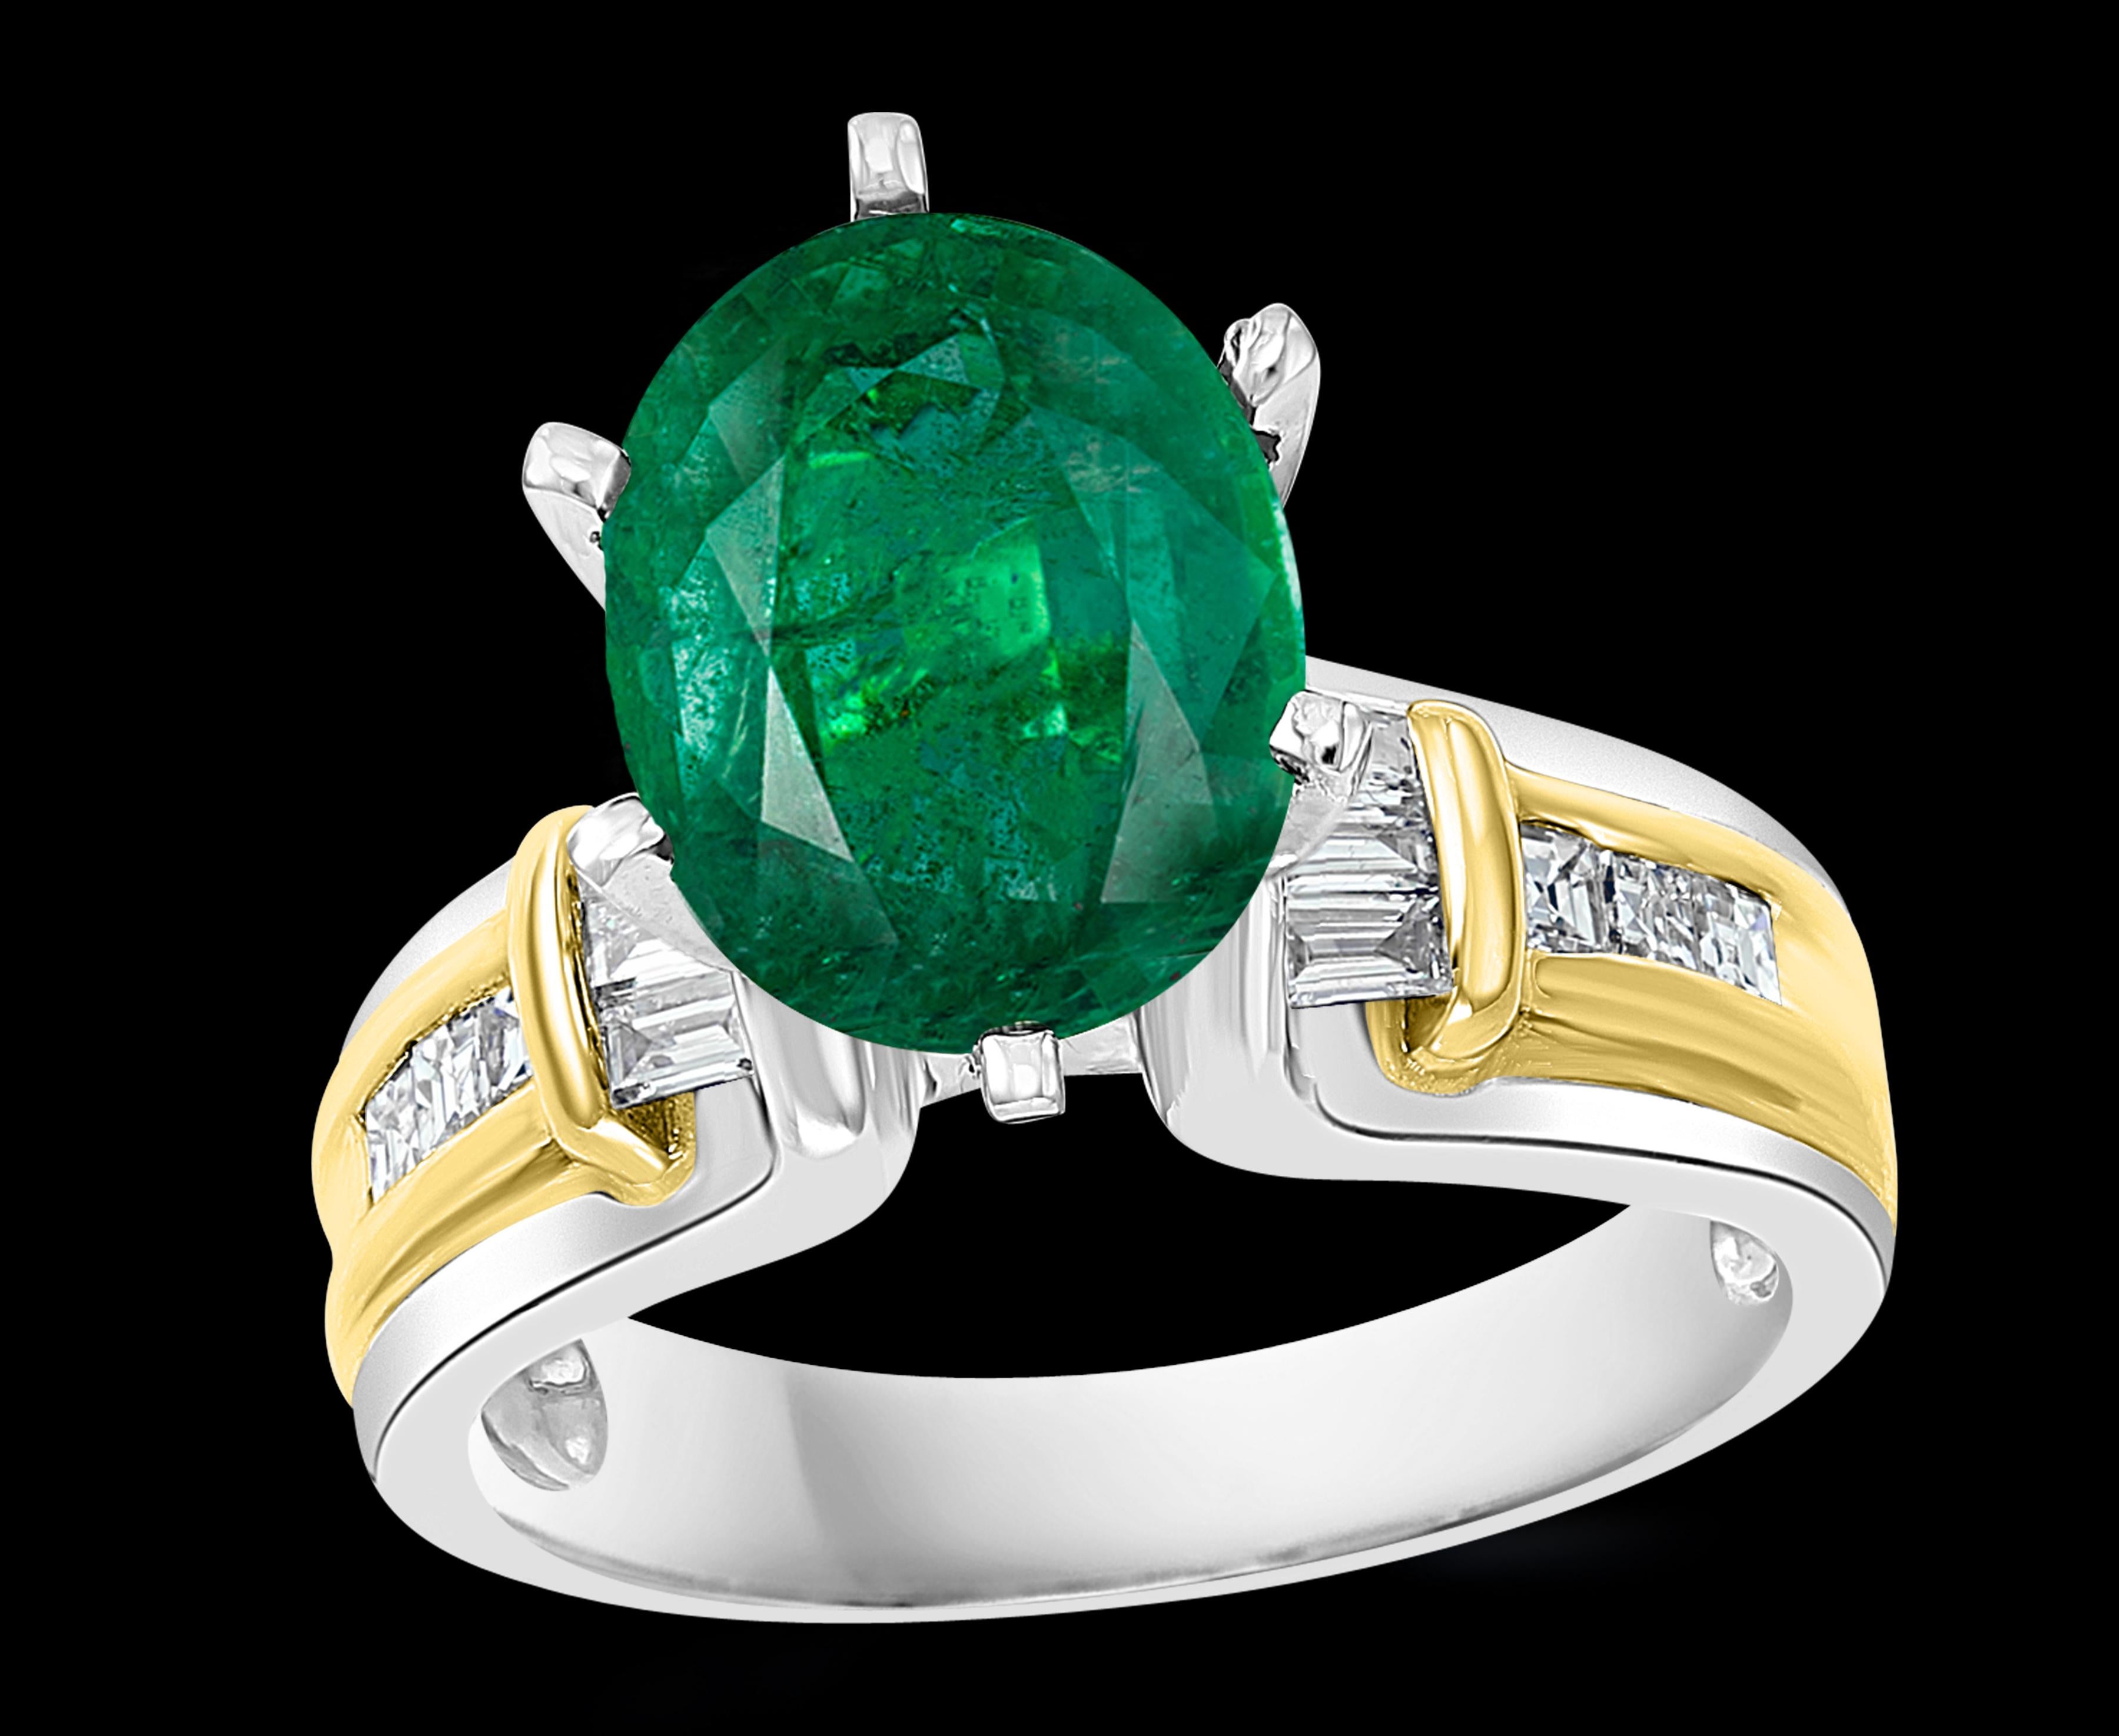 5.5 Carat Oval Cut Emerald  and Diamond in 18 Karat Two-Tone Gold Ring Estate
approximately 5.5  Carat  Emerald and Diamond Ring, Estate with  no color enhancement.
Gold: 18 Karat Yellow gold and Platinum : 12.3 Grams
Measurement of the emerald 12mm